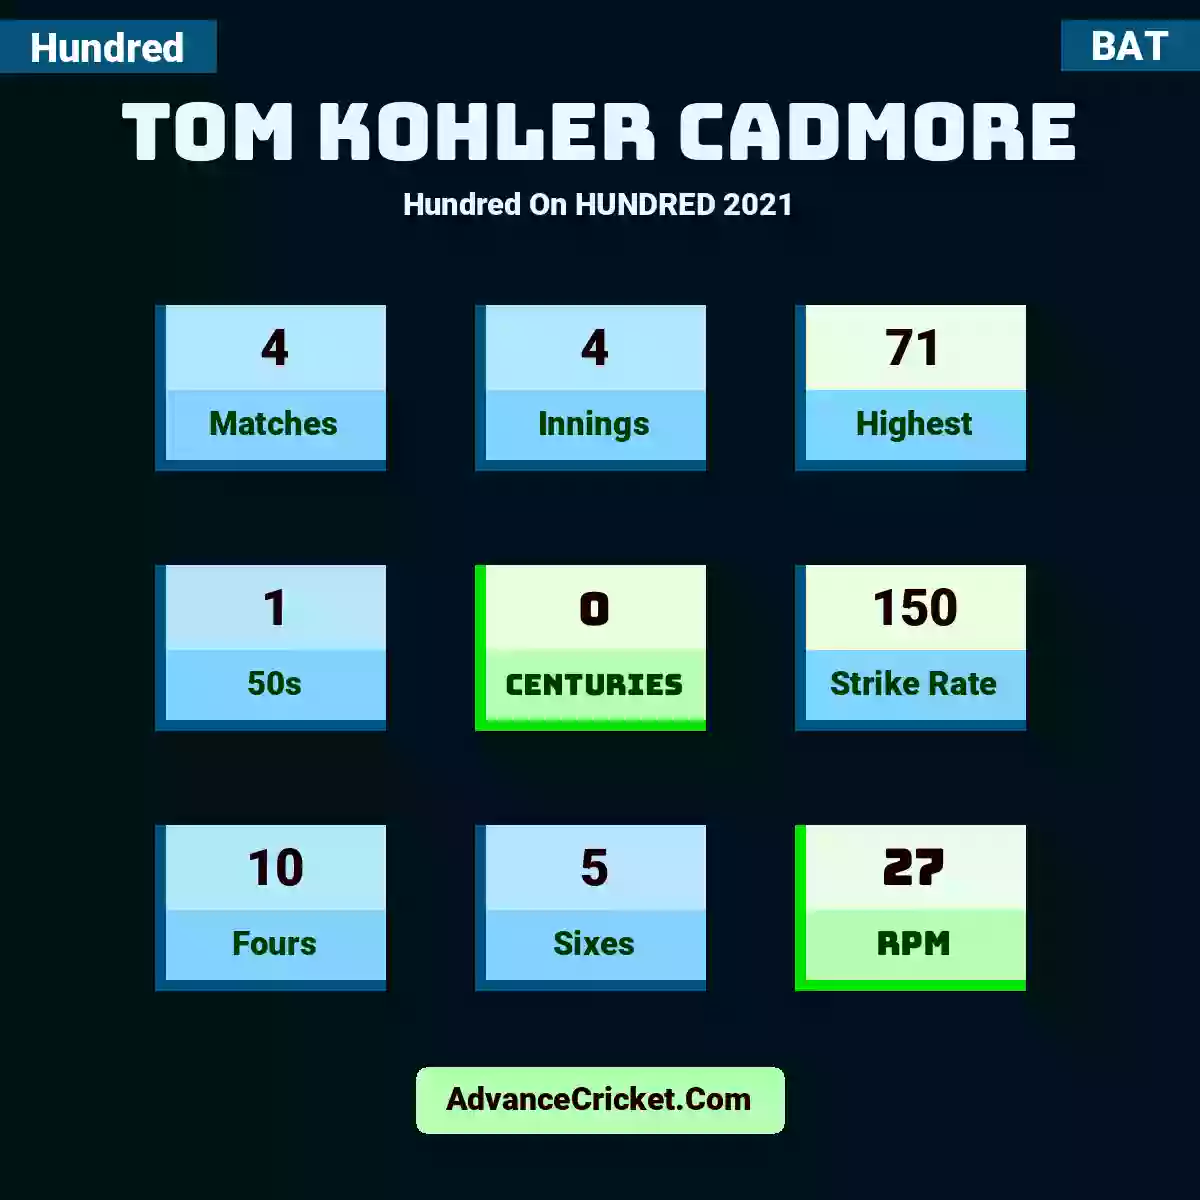 Tom Kohler Cadmore Hundred  On HUNDRED 2021, Tom Kohler Cadmore played 4 matches, scored 71 runs as highest, 1 half-centuries, and 0 centuries, with a strike rate of 150. T.Cadmore hit 10 fours and 5 sixes, with an RPM of 27.